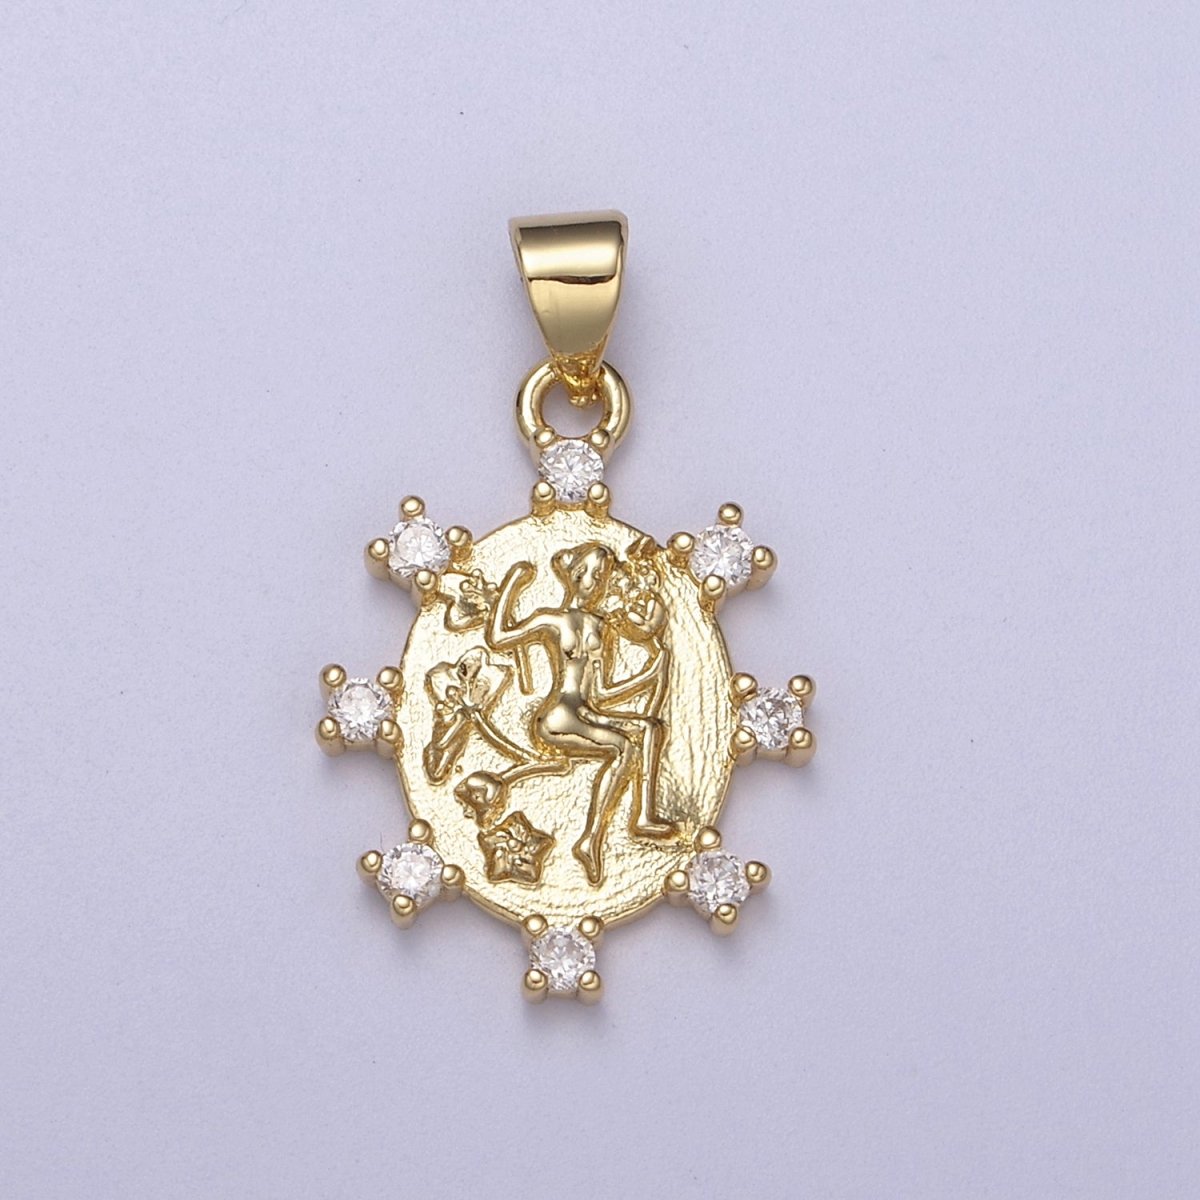 Oval Queen Pendant with Cz Charm Gold Goddess Inspired H-153 - DLUXCA